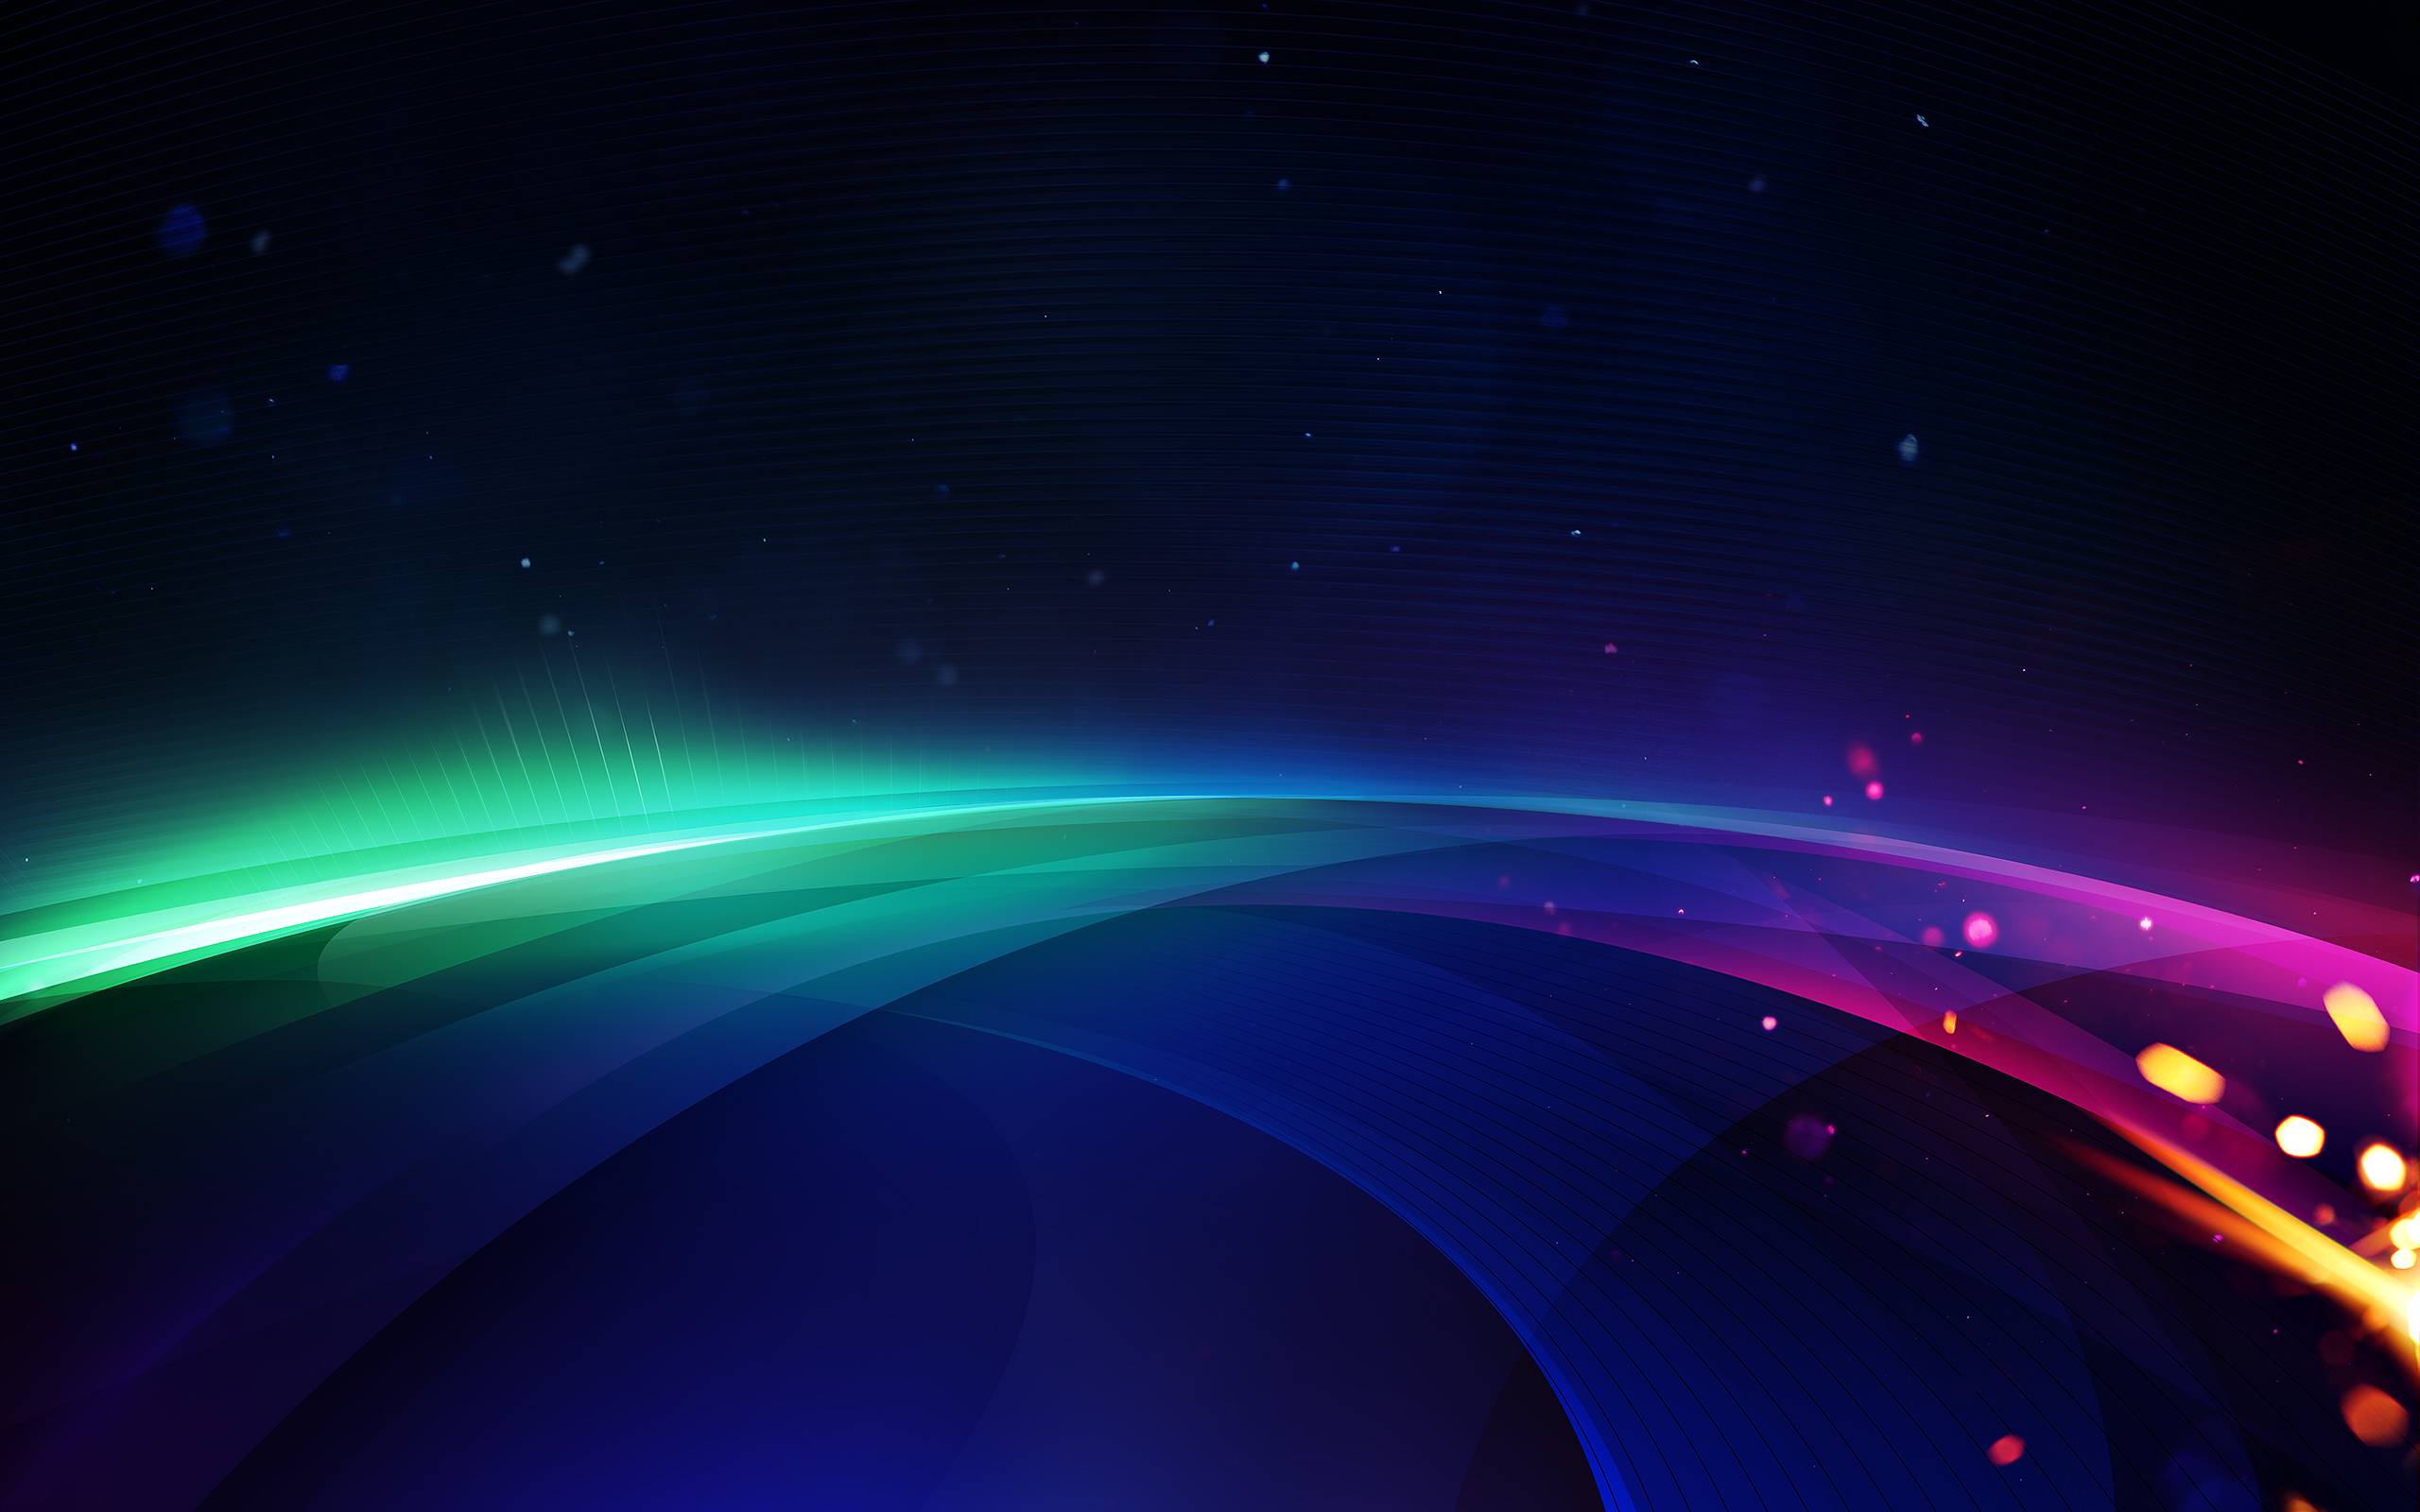 Top Official Microsoft Windows 8 Wallpapers Part 3 | All for ...